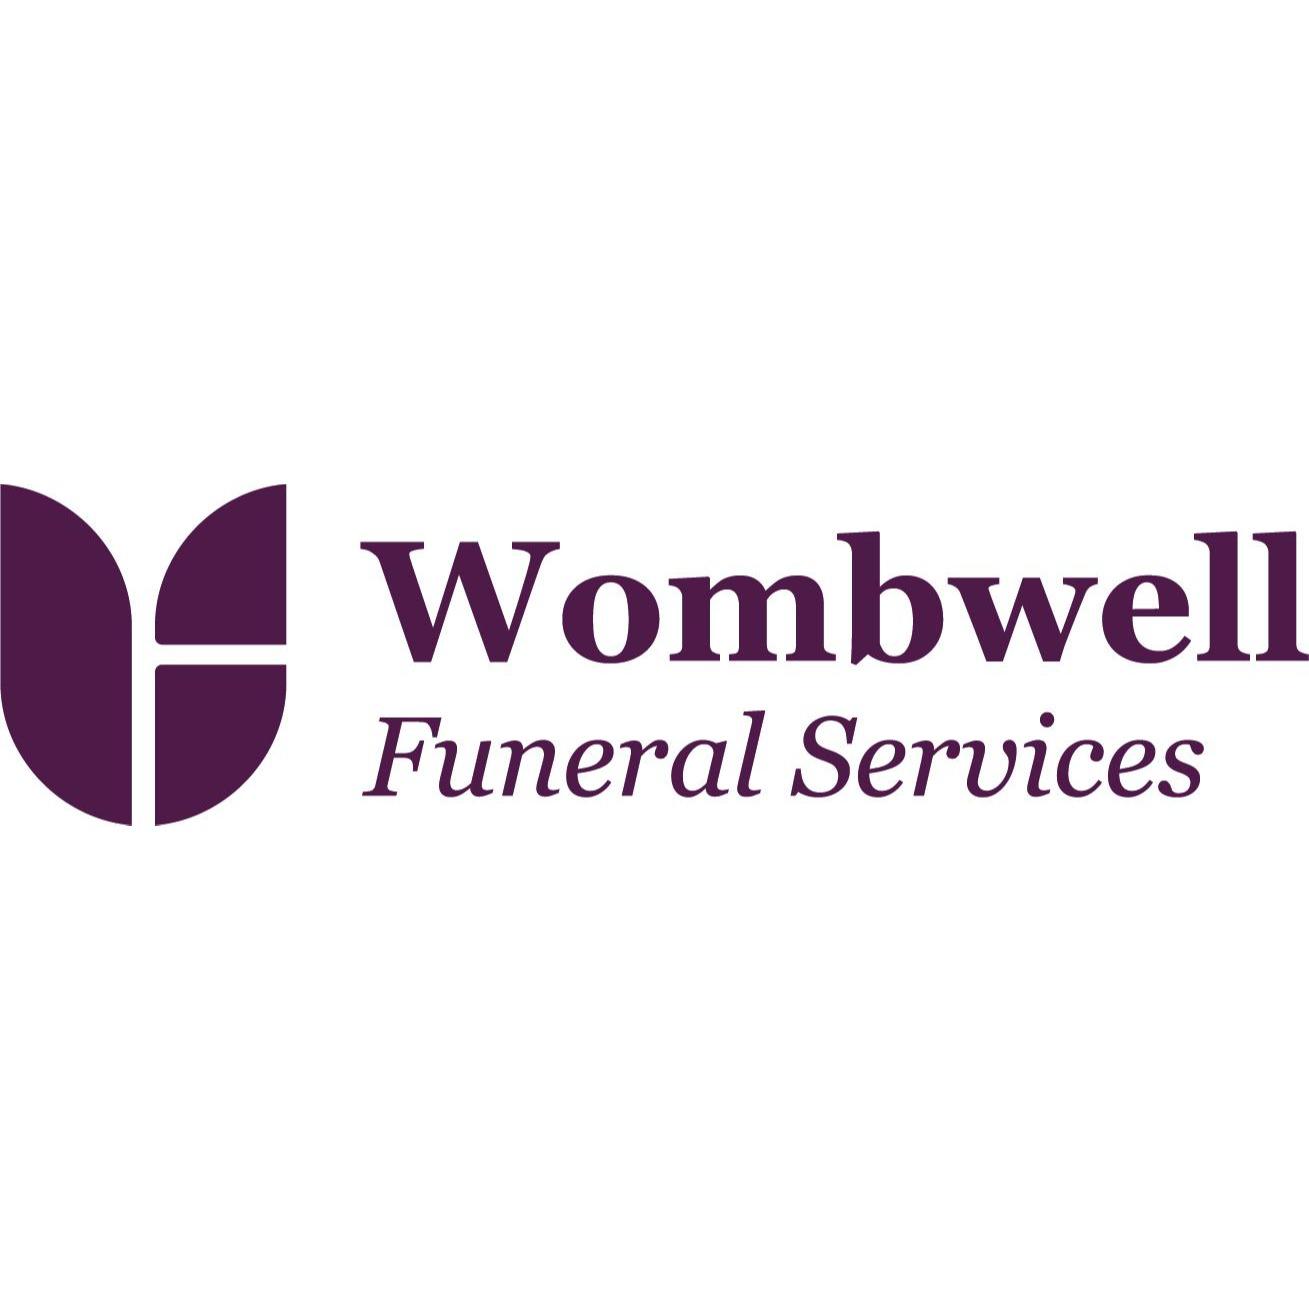 Wombwell Funeral Services Logo